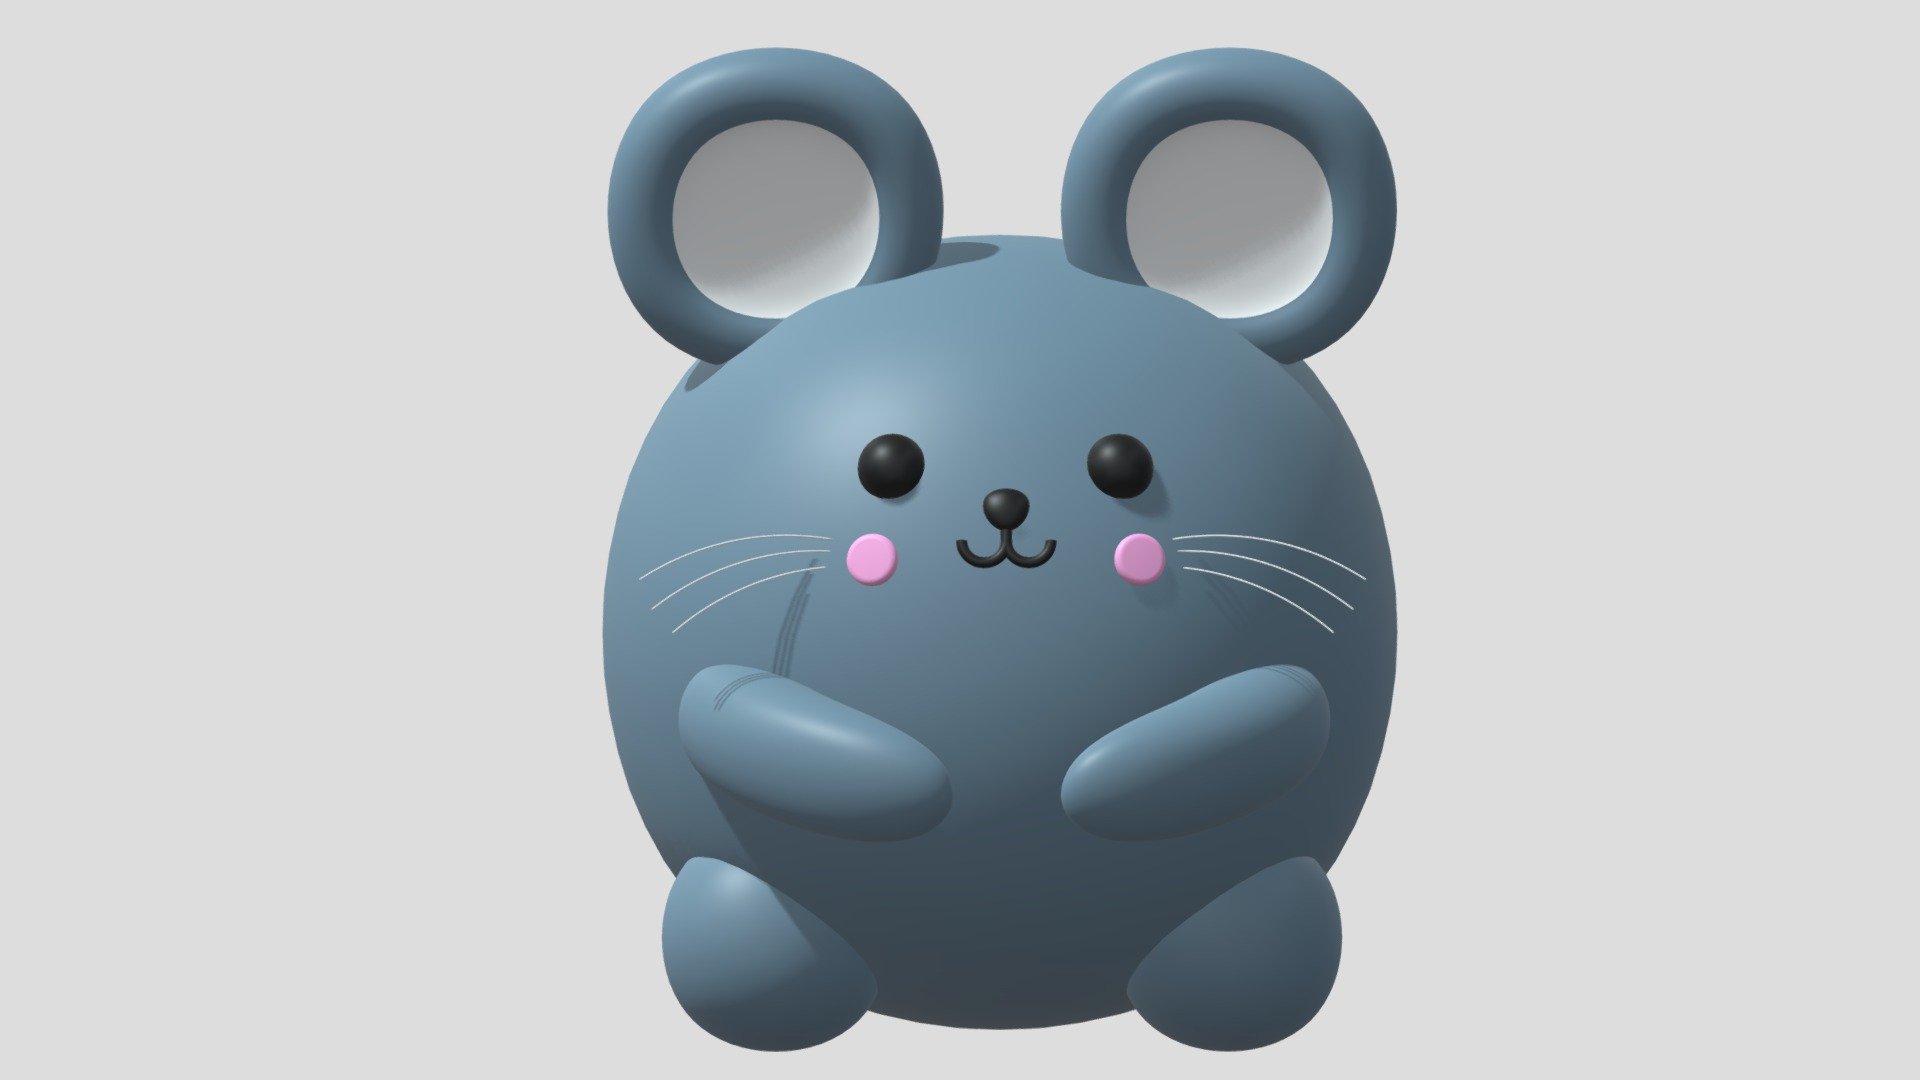 -Cartoon Cute Mouse Rat.

-This product contains 20 objects.

-Mid Poly : Verts : 13,715 Faces : 13,520.

-High Poly : Verts : 26,099 Faces : 25,904.

-Materials have the correct names.

-This product was created in Blender 2.8

-Formats: blend, fbx, obj, c4d, dae, abc, stl, glb, unity.

-We hope you enjoy this model.

-Thank you 3d model